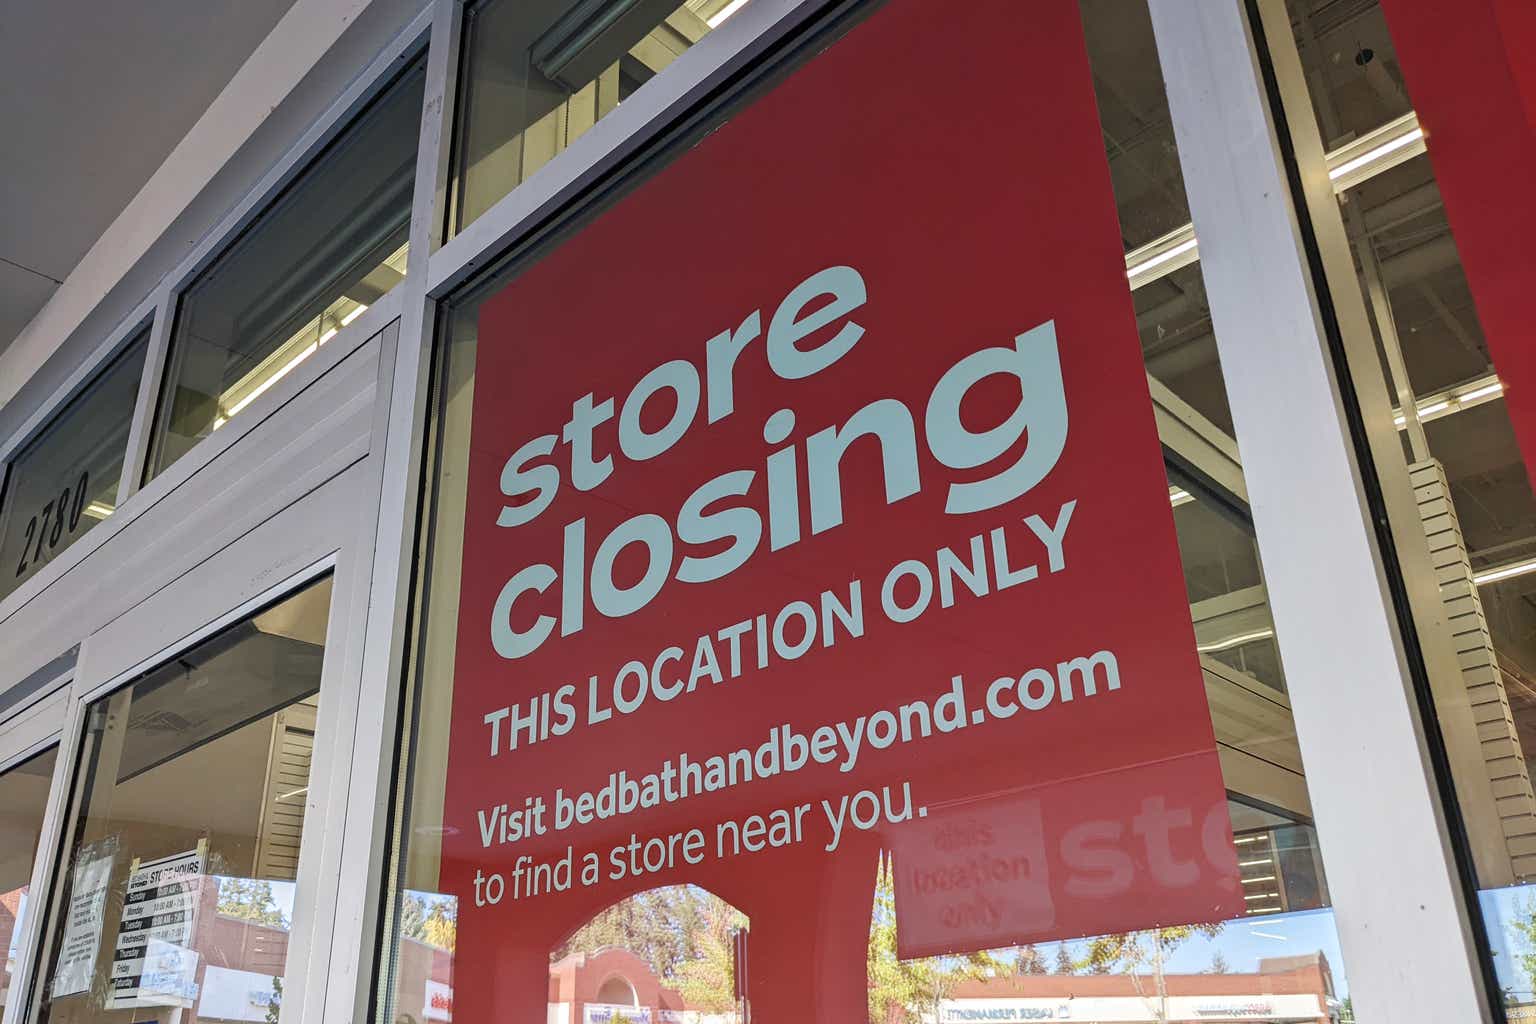 Bed Bath & Beyond to liquidate all stores, files for bankruptcy